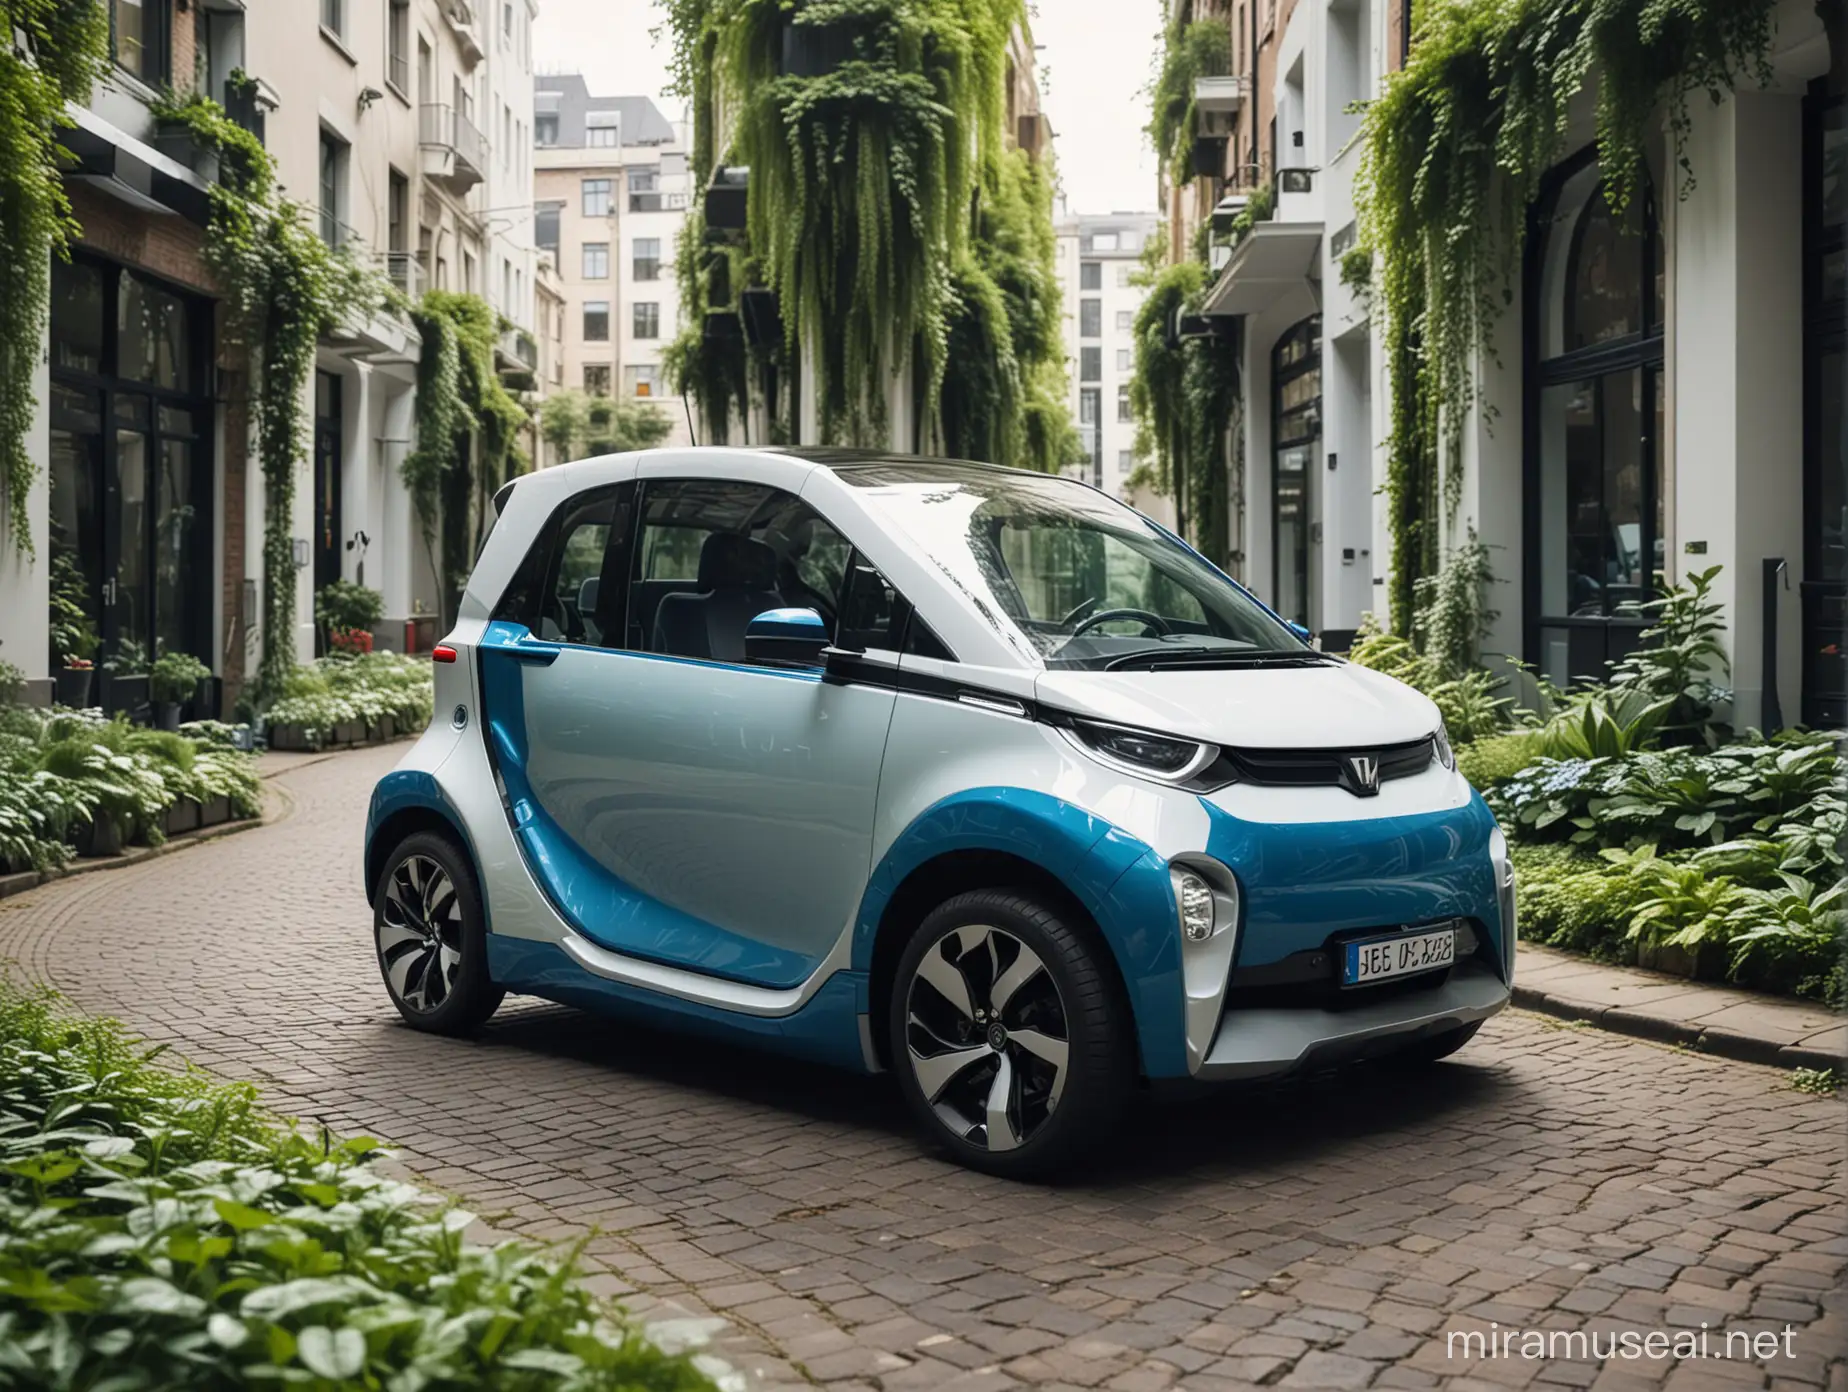 a sharp edged designed small citycar, twoseater, blue and white, with a sunroof, driving through a futuristic city with much greening and vertical gardens